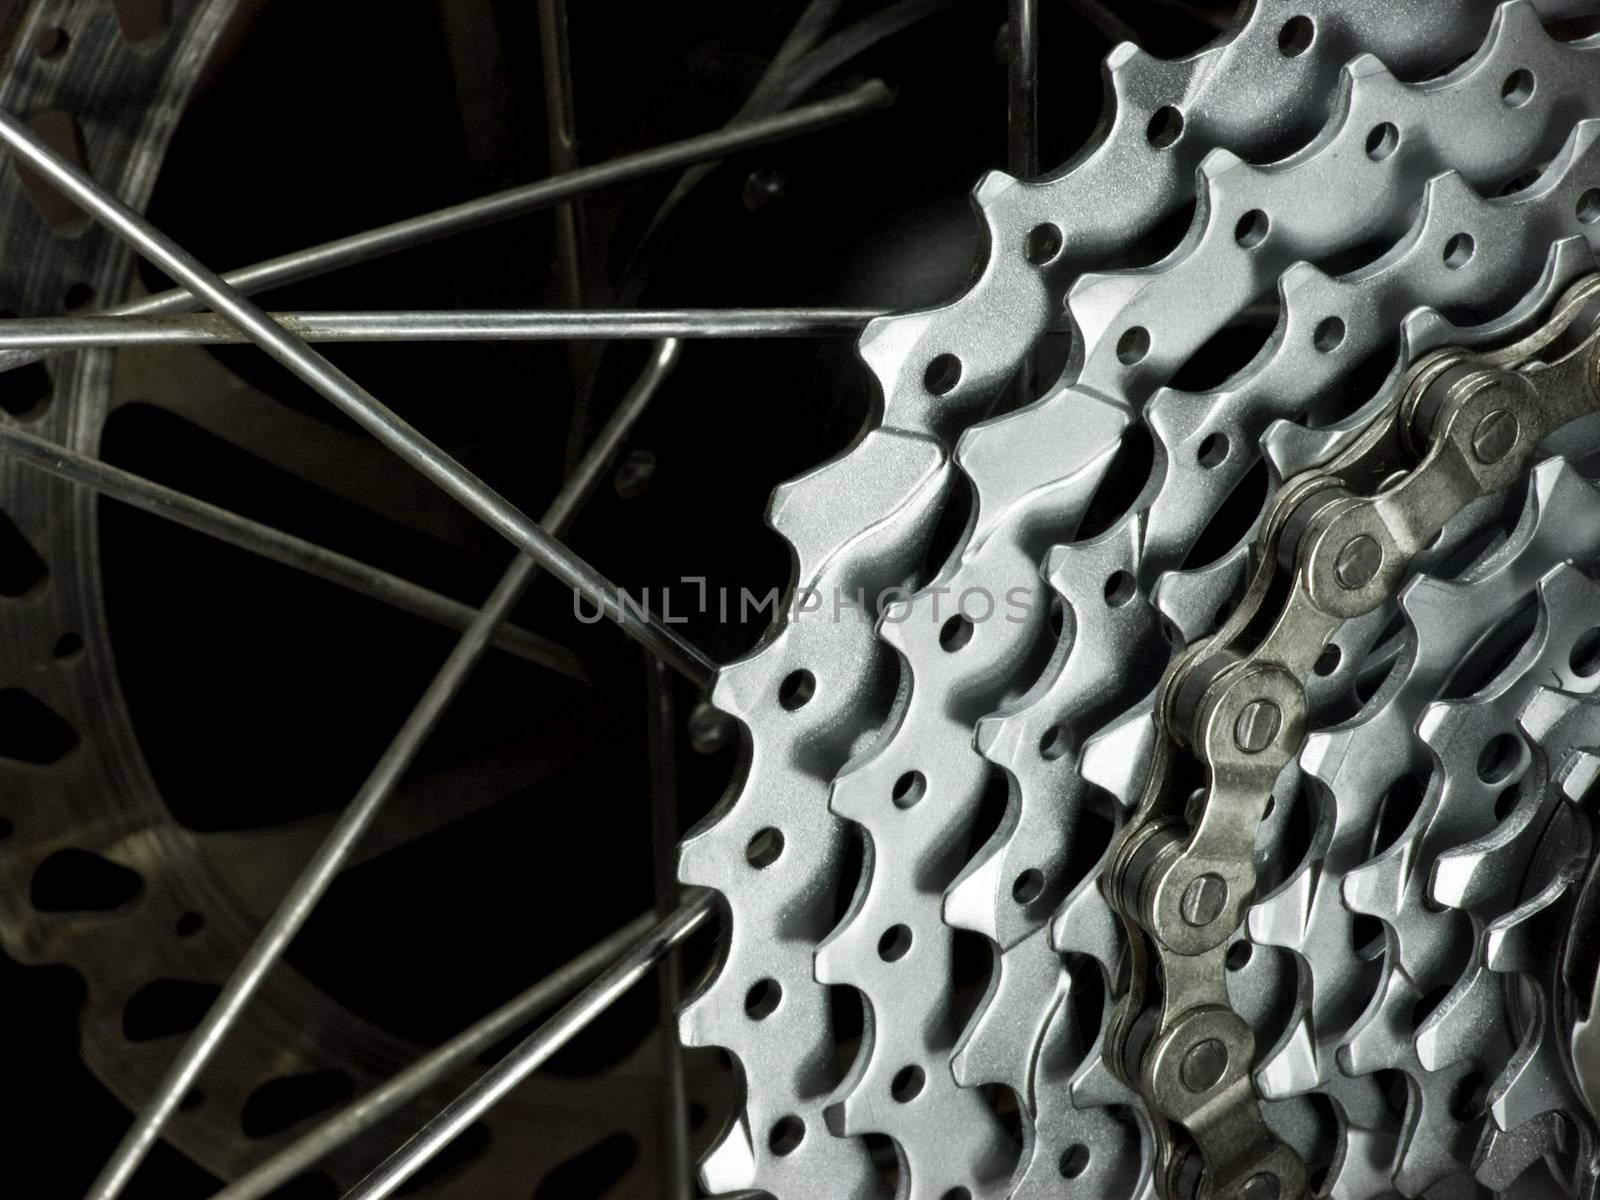 Rear mountain bike wheel detail with cassette, chain, spokes and brakes disc rotor close-up